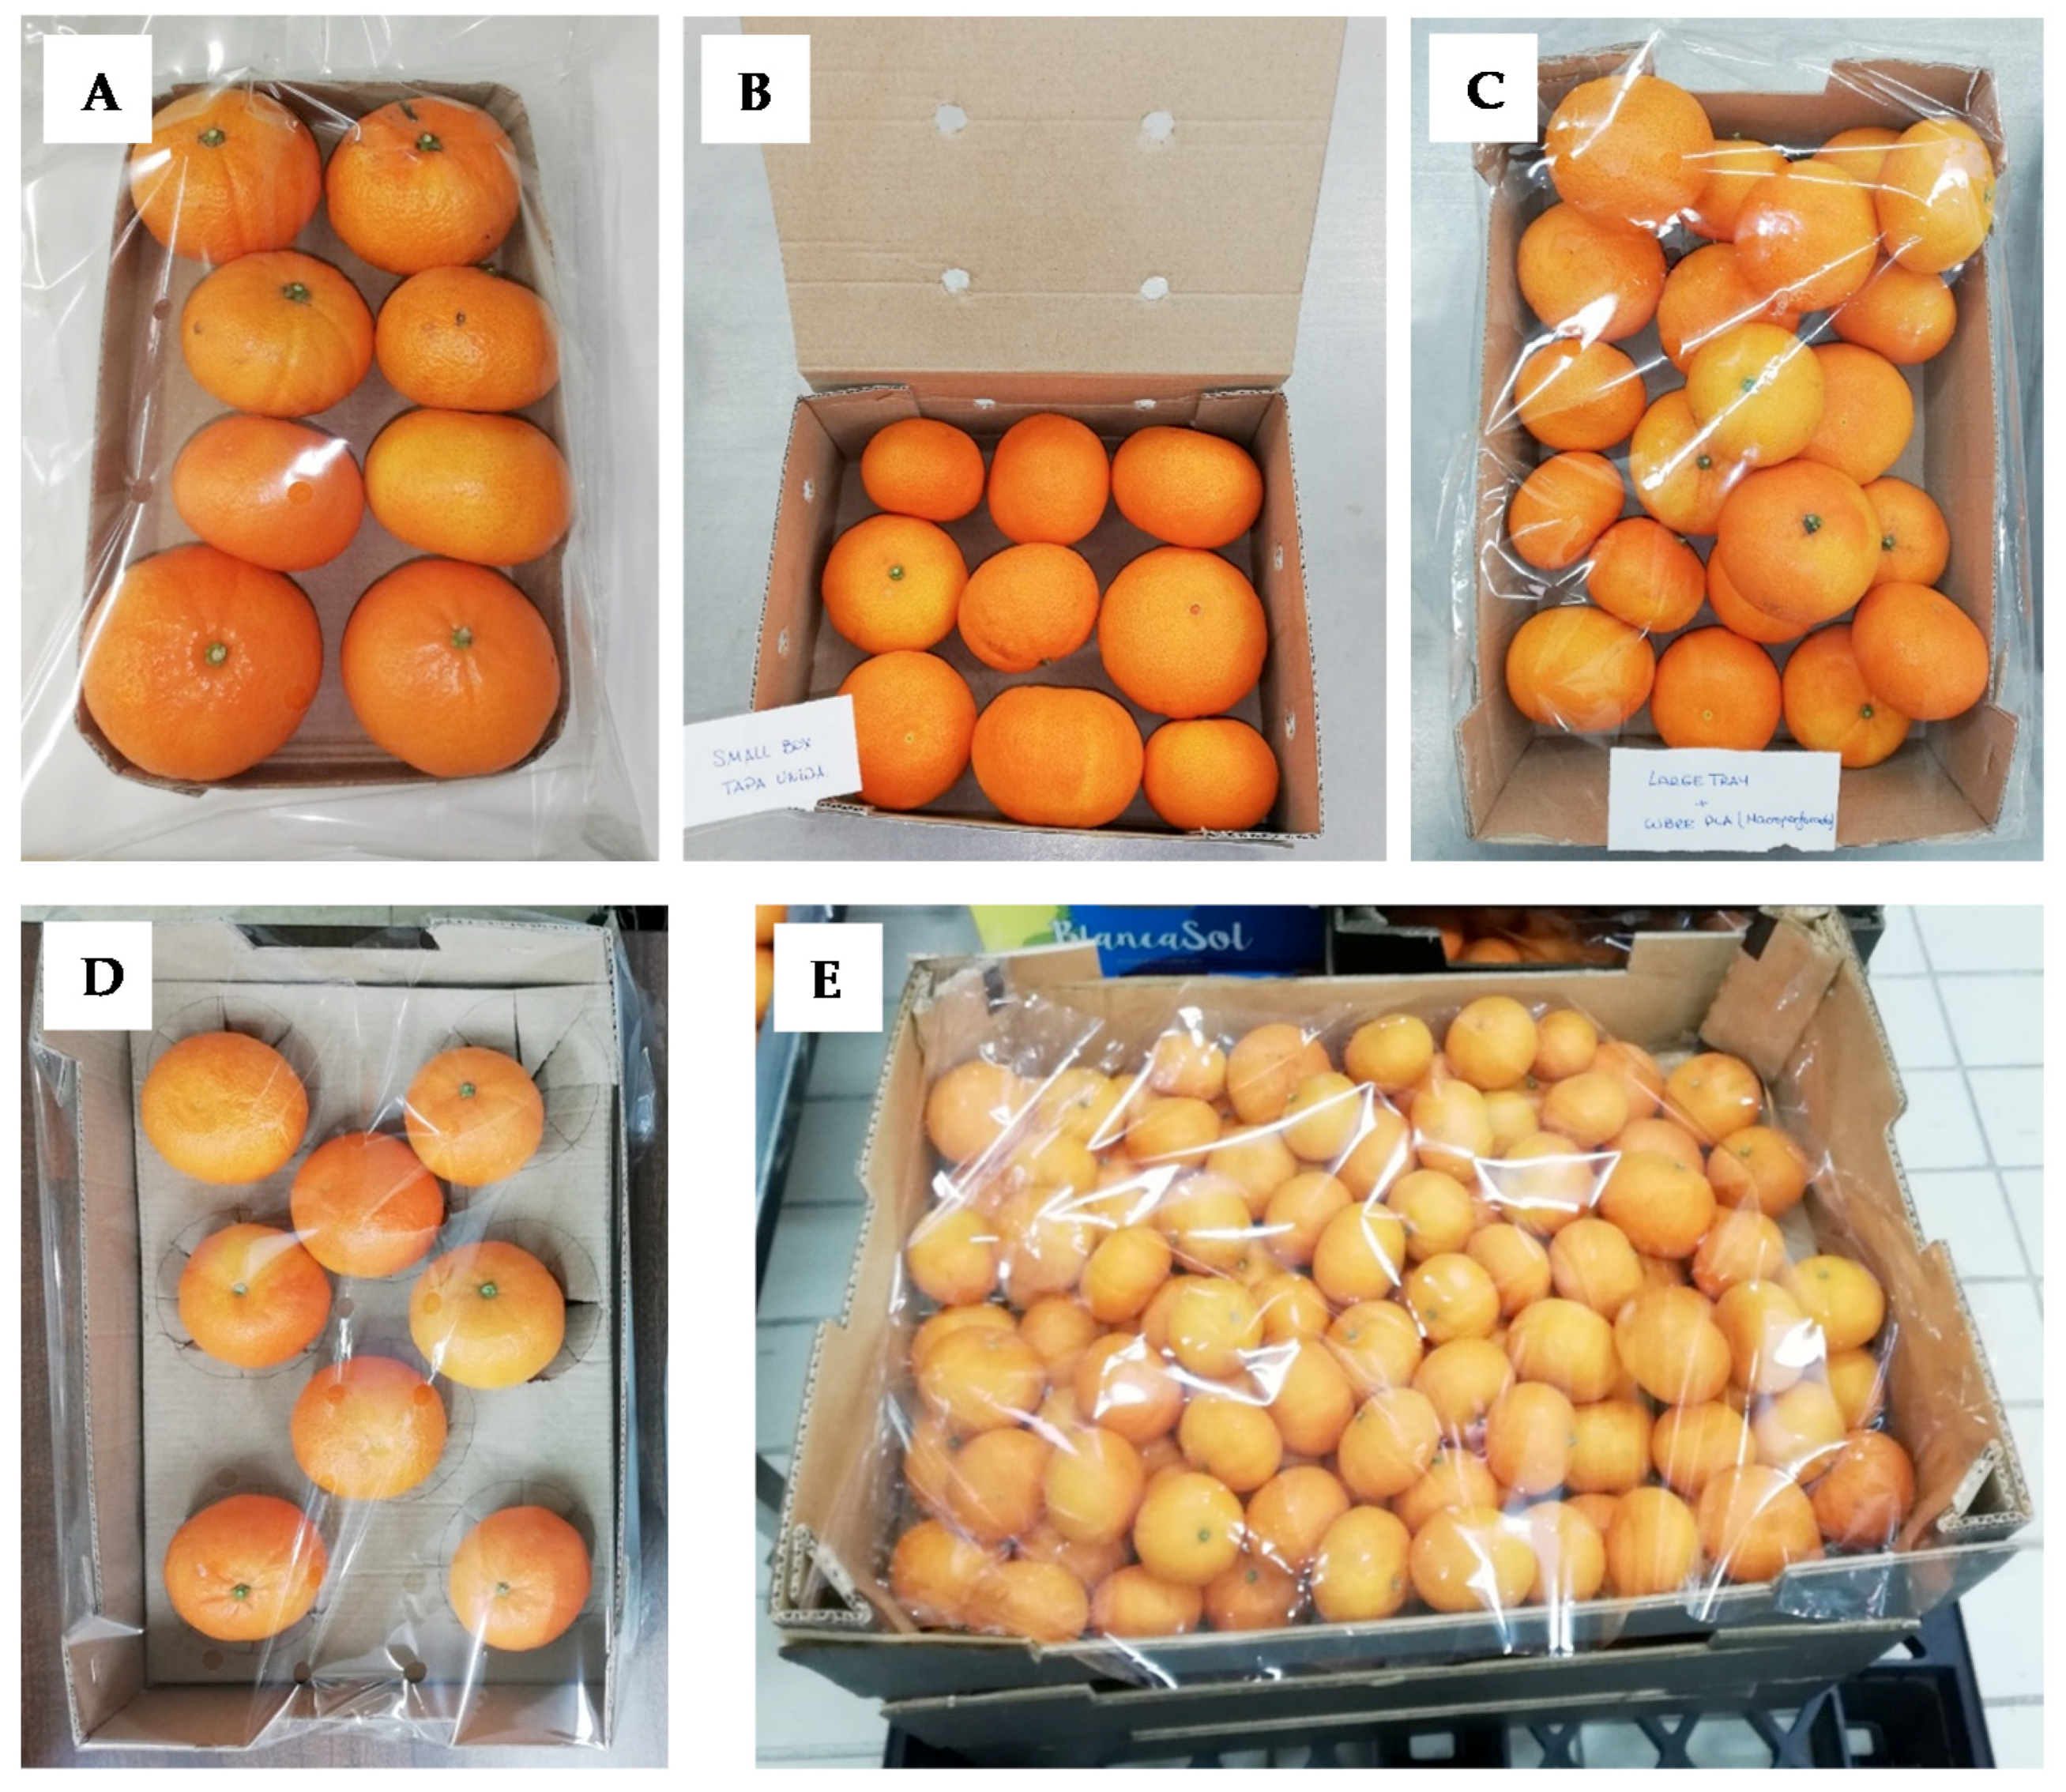 Risk In Consuming Rotten Fruits and Vegetables — Solar-powered cold storage  for developing countries